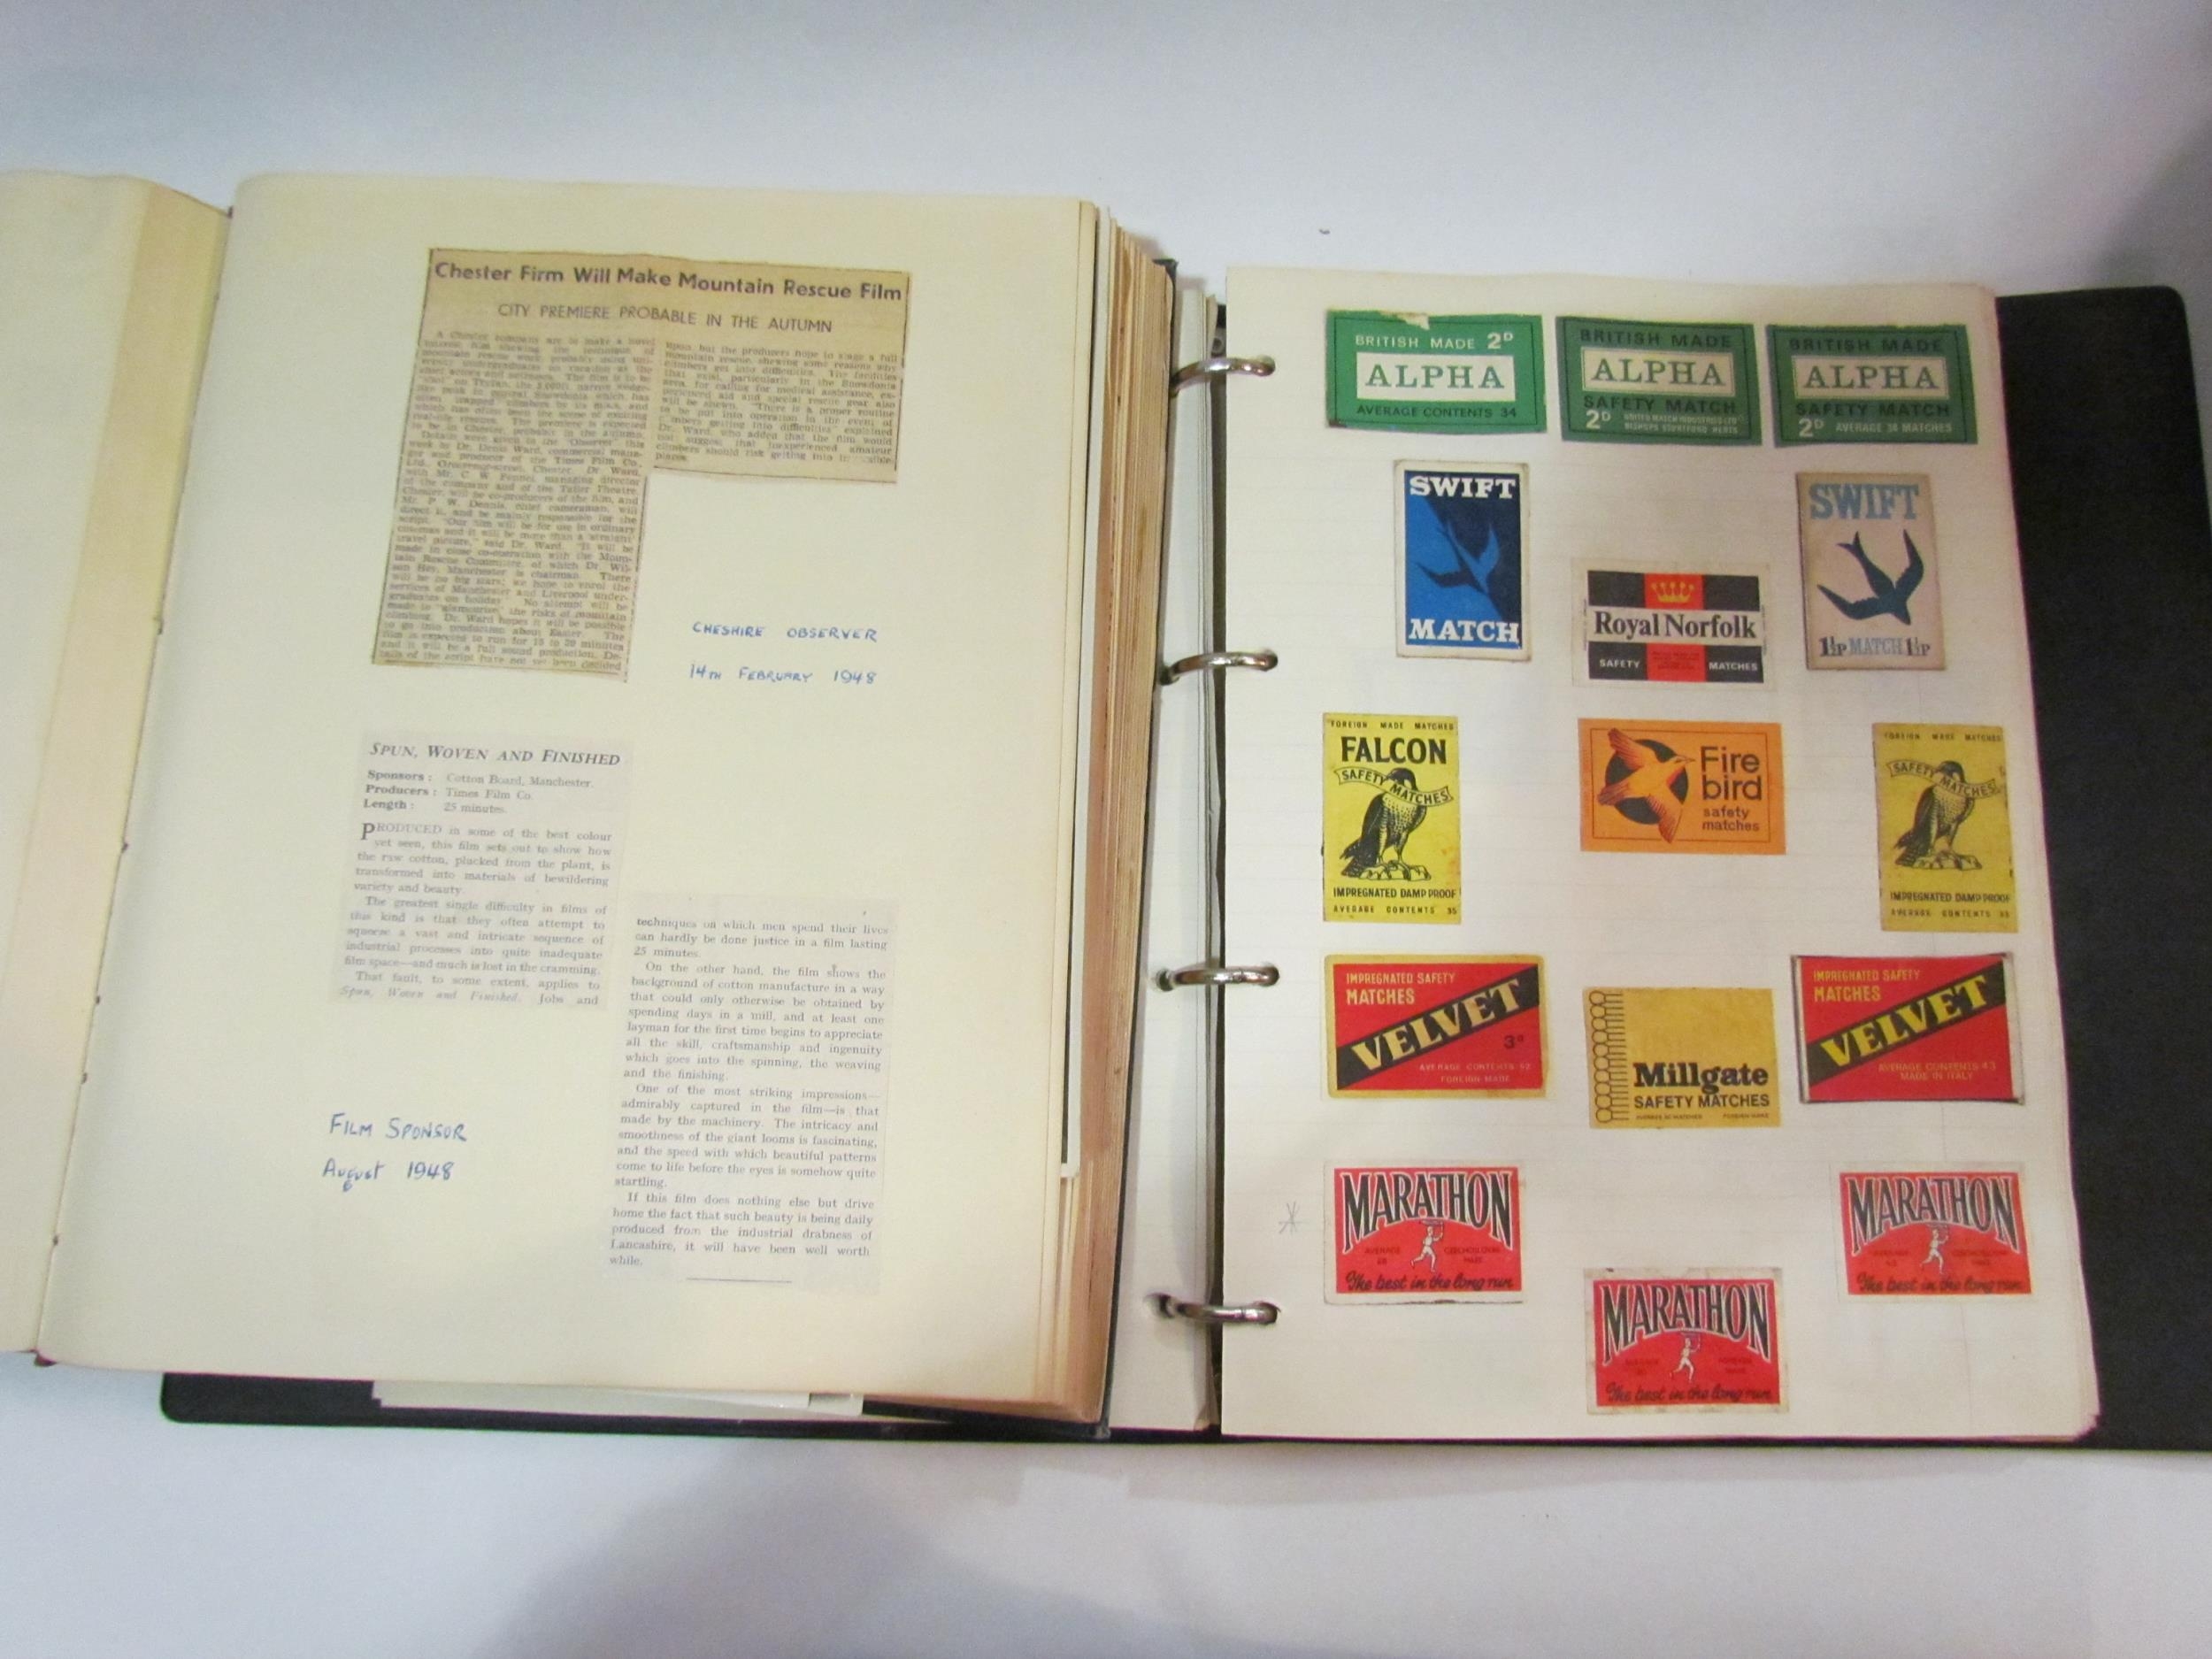 Two albums, one containing Matchbox covers, the other a scrapbook relating to Mr. Dennis an early